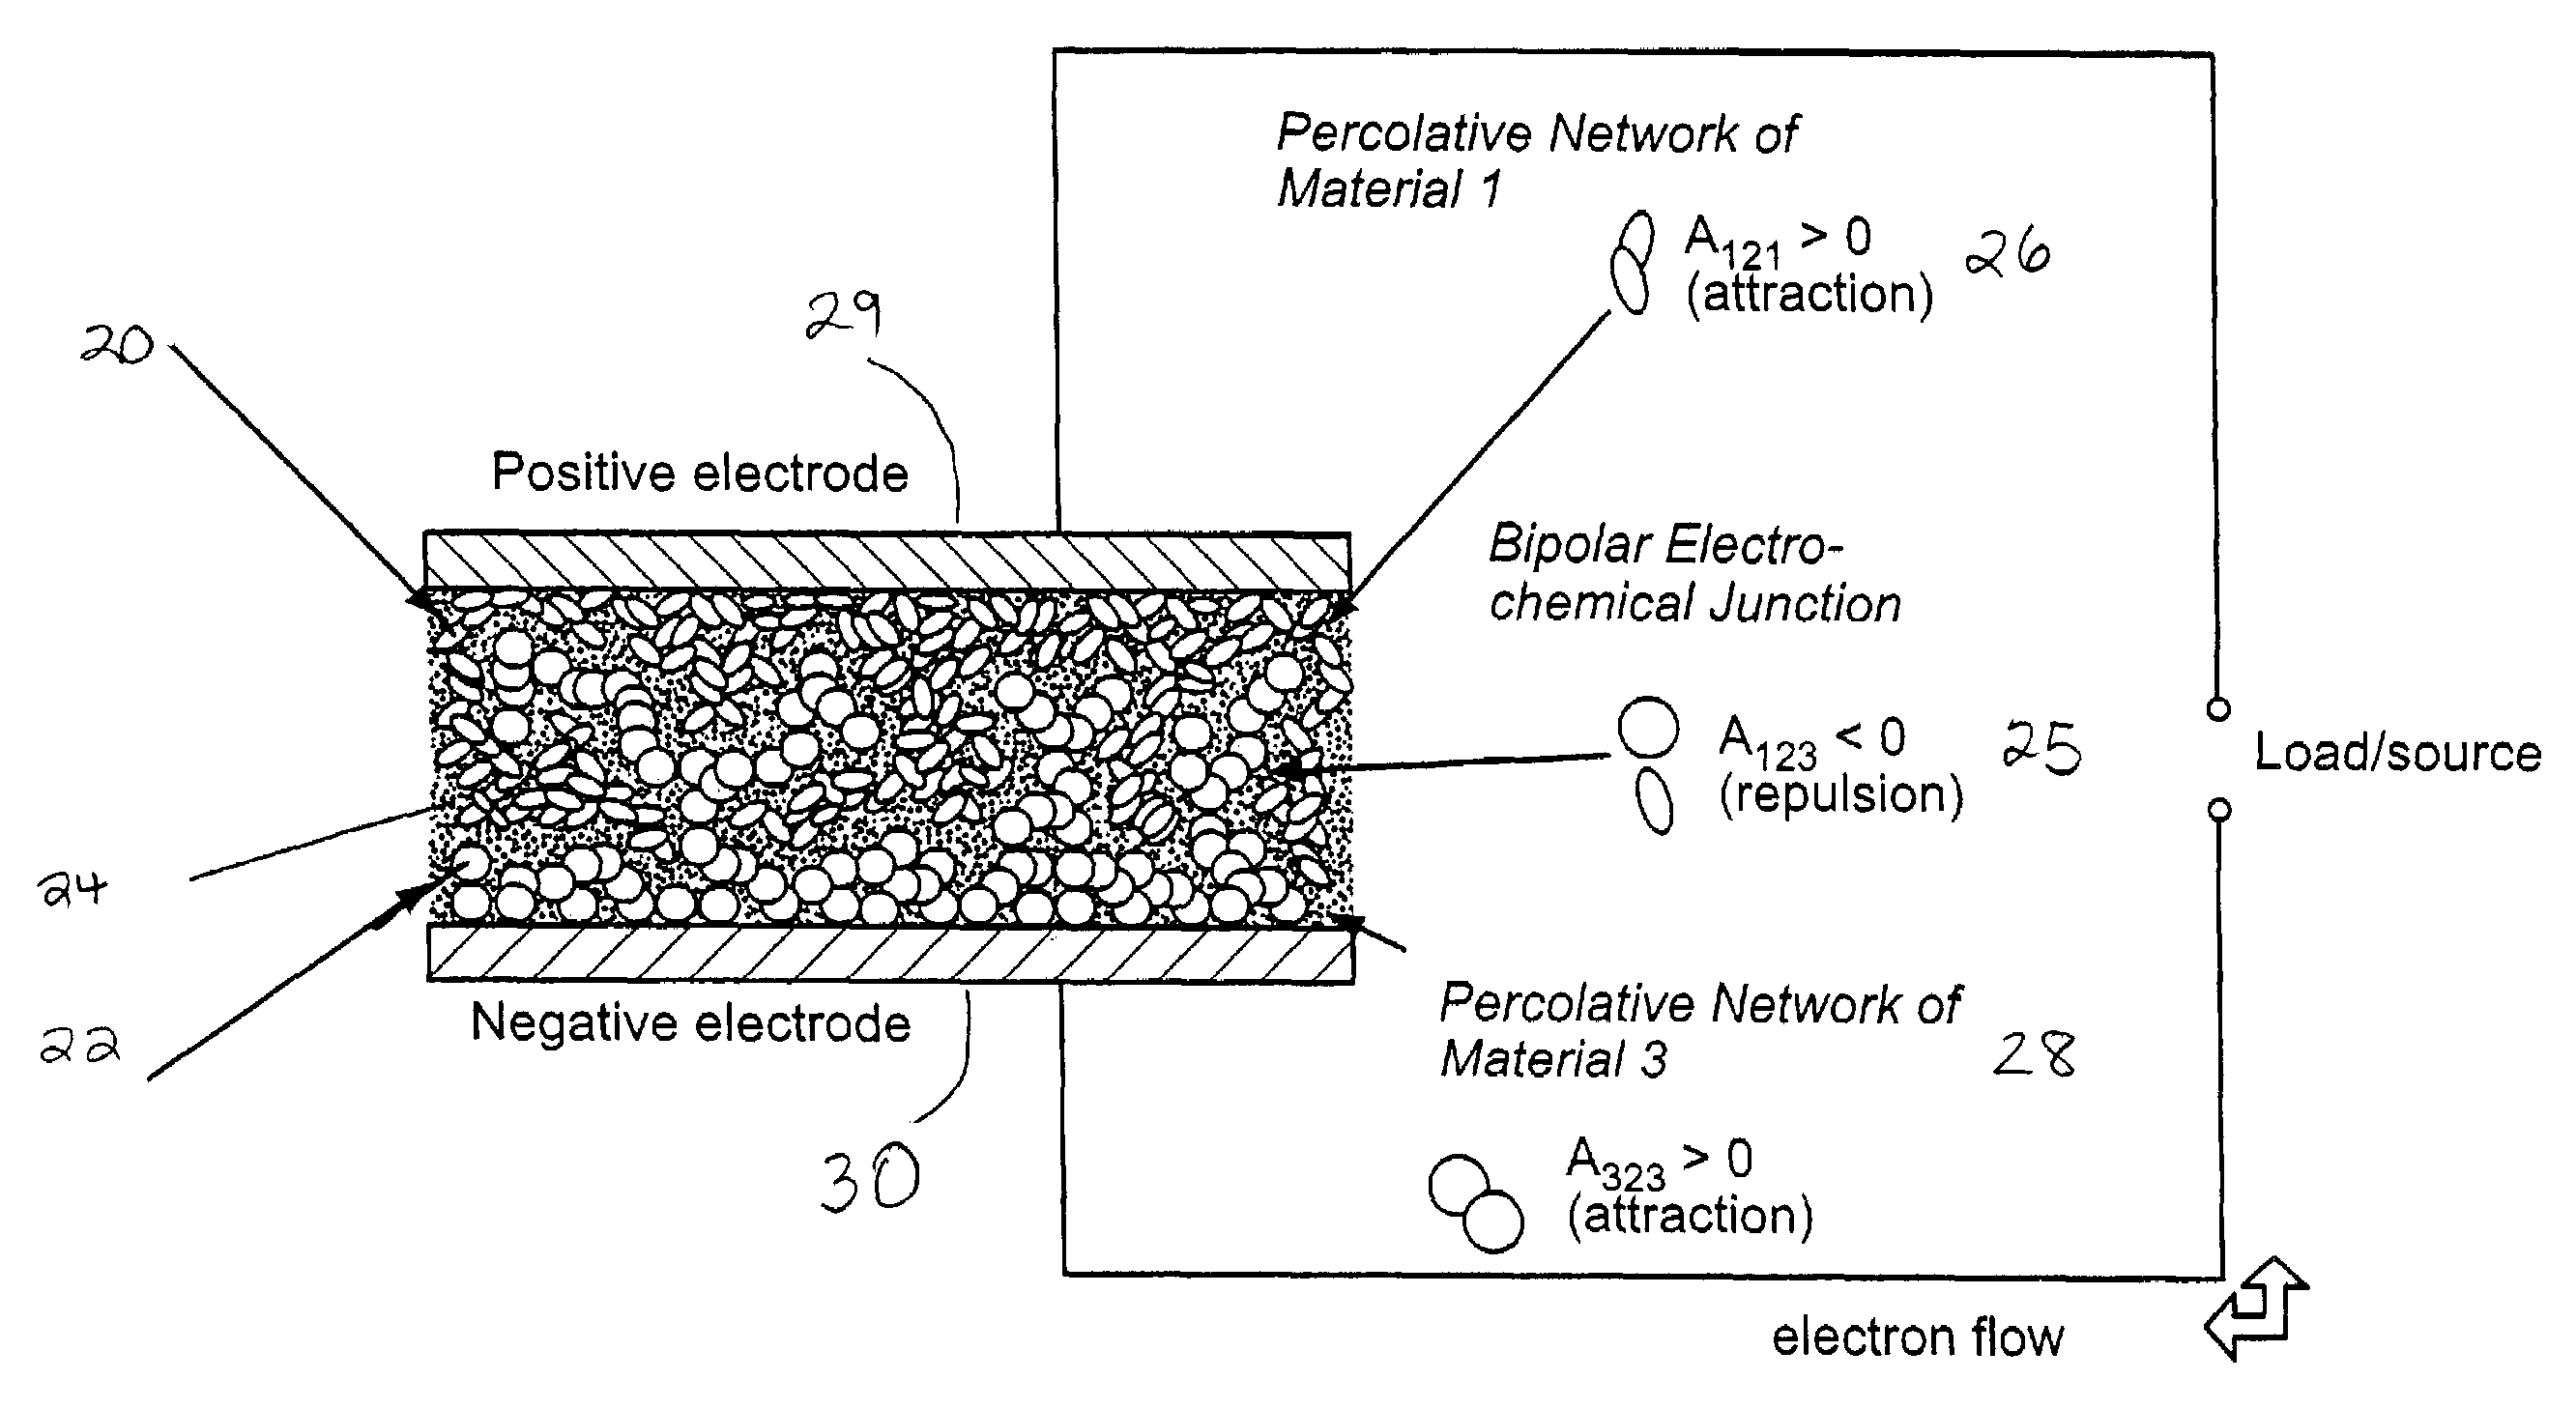 Self-organizing battery structure with electrode particles that exert a repelling force on the opposite electrode